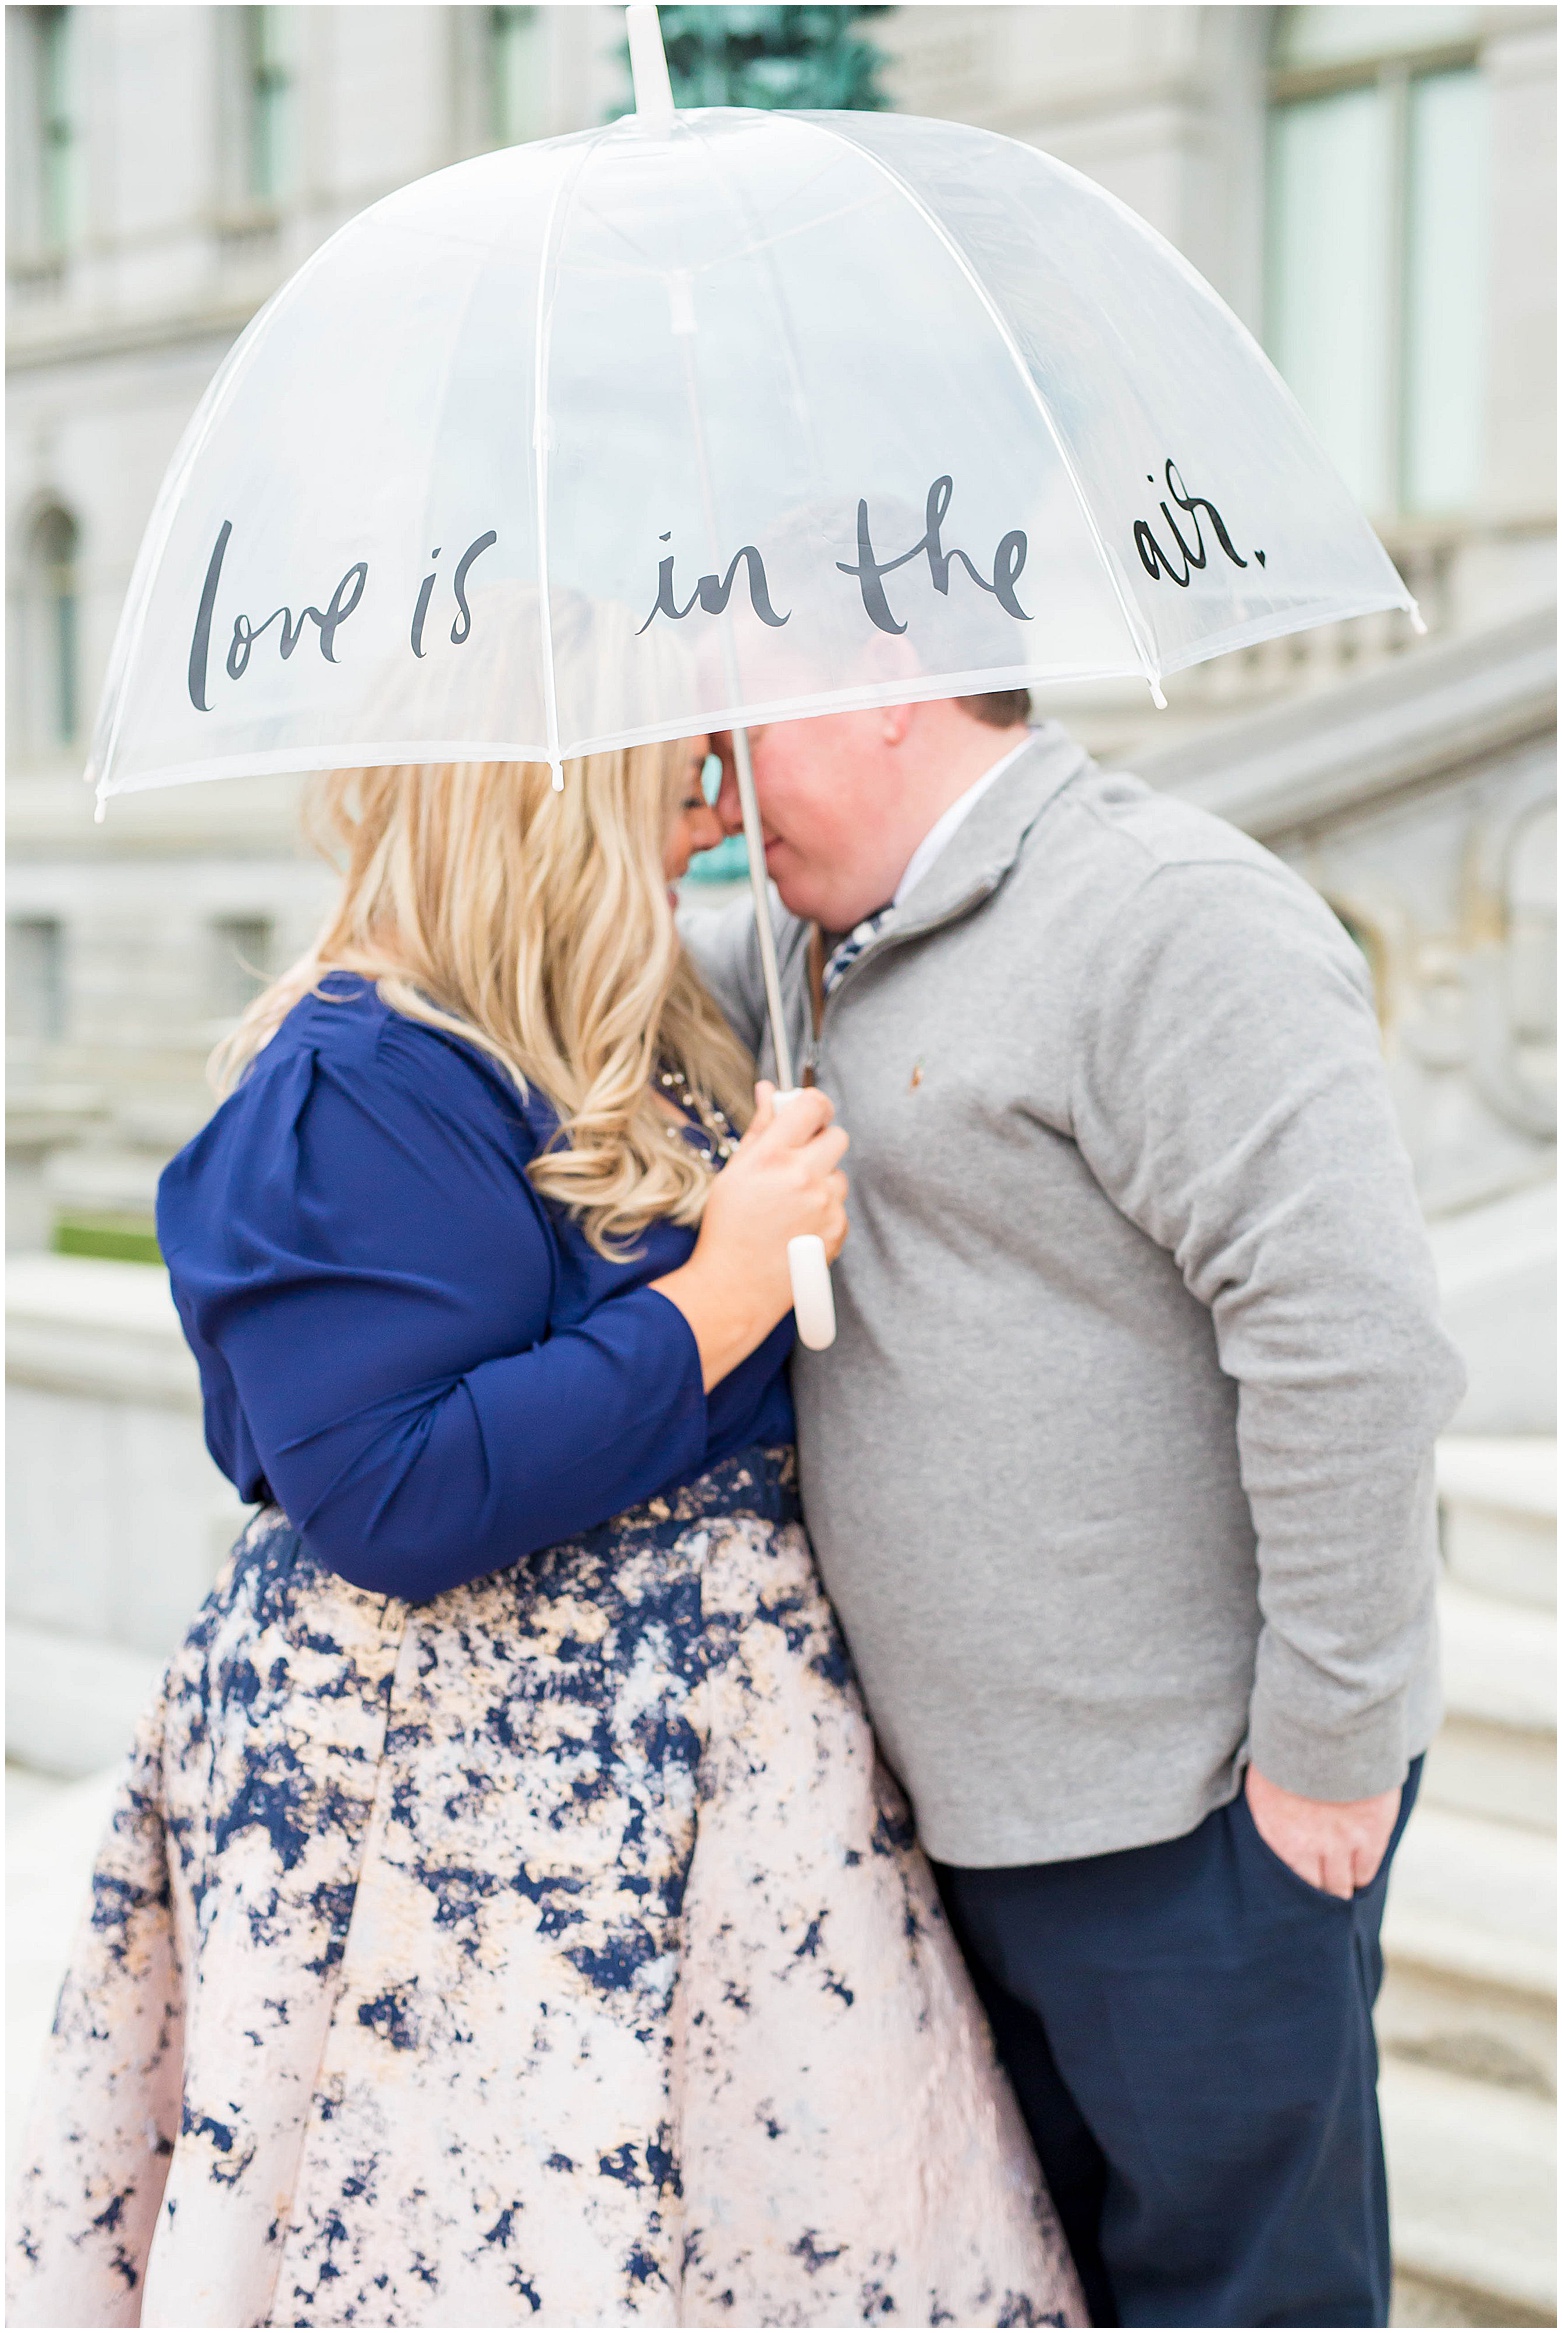 View More: http://hopetaylorphotographyphotos.pass.us/stephanie-and-jason-engagement